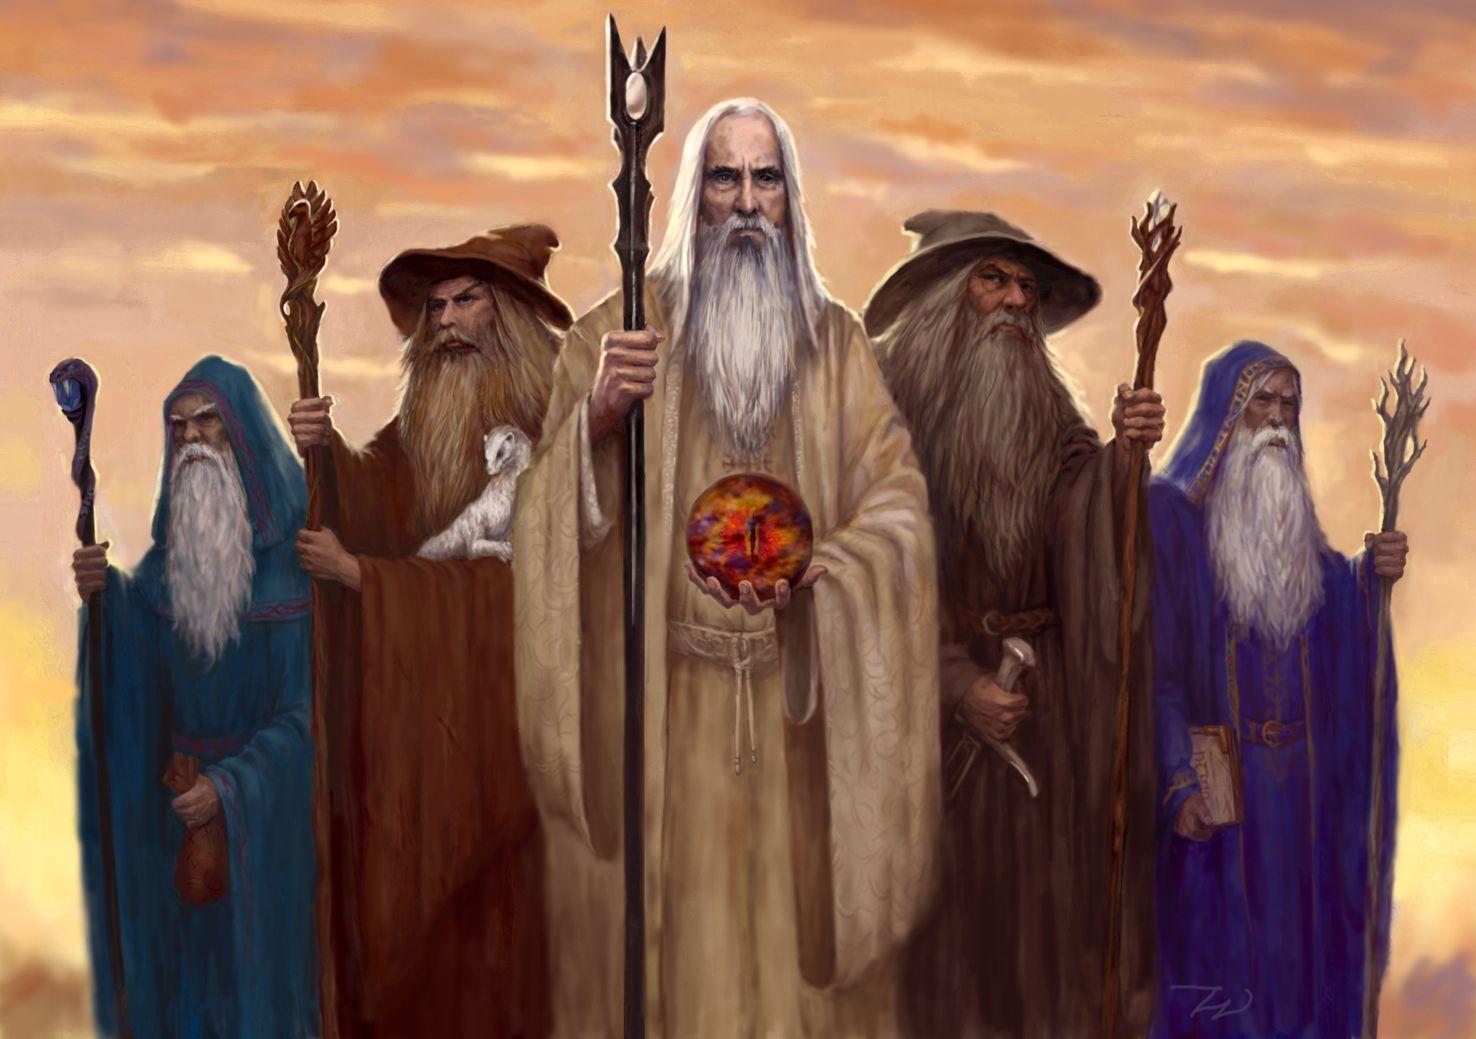 movies, Gandalf, The Lord of the Rings, wizards, Saruman, radagast